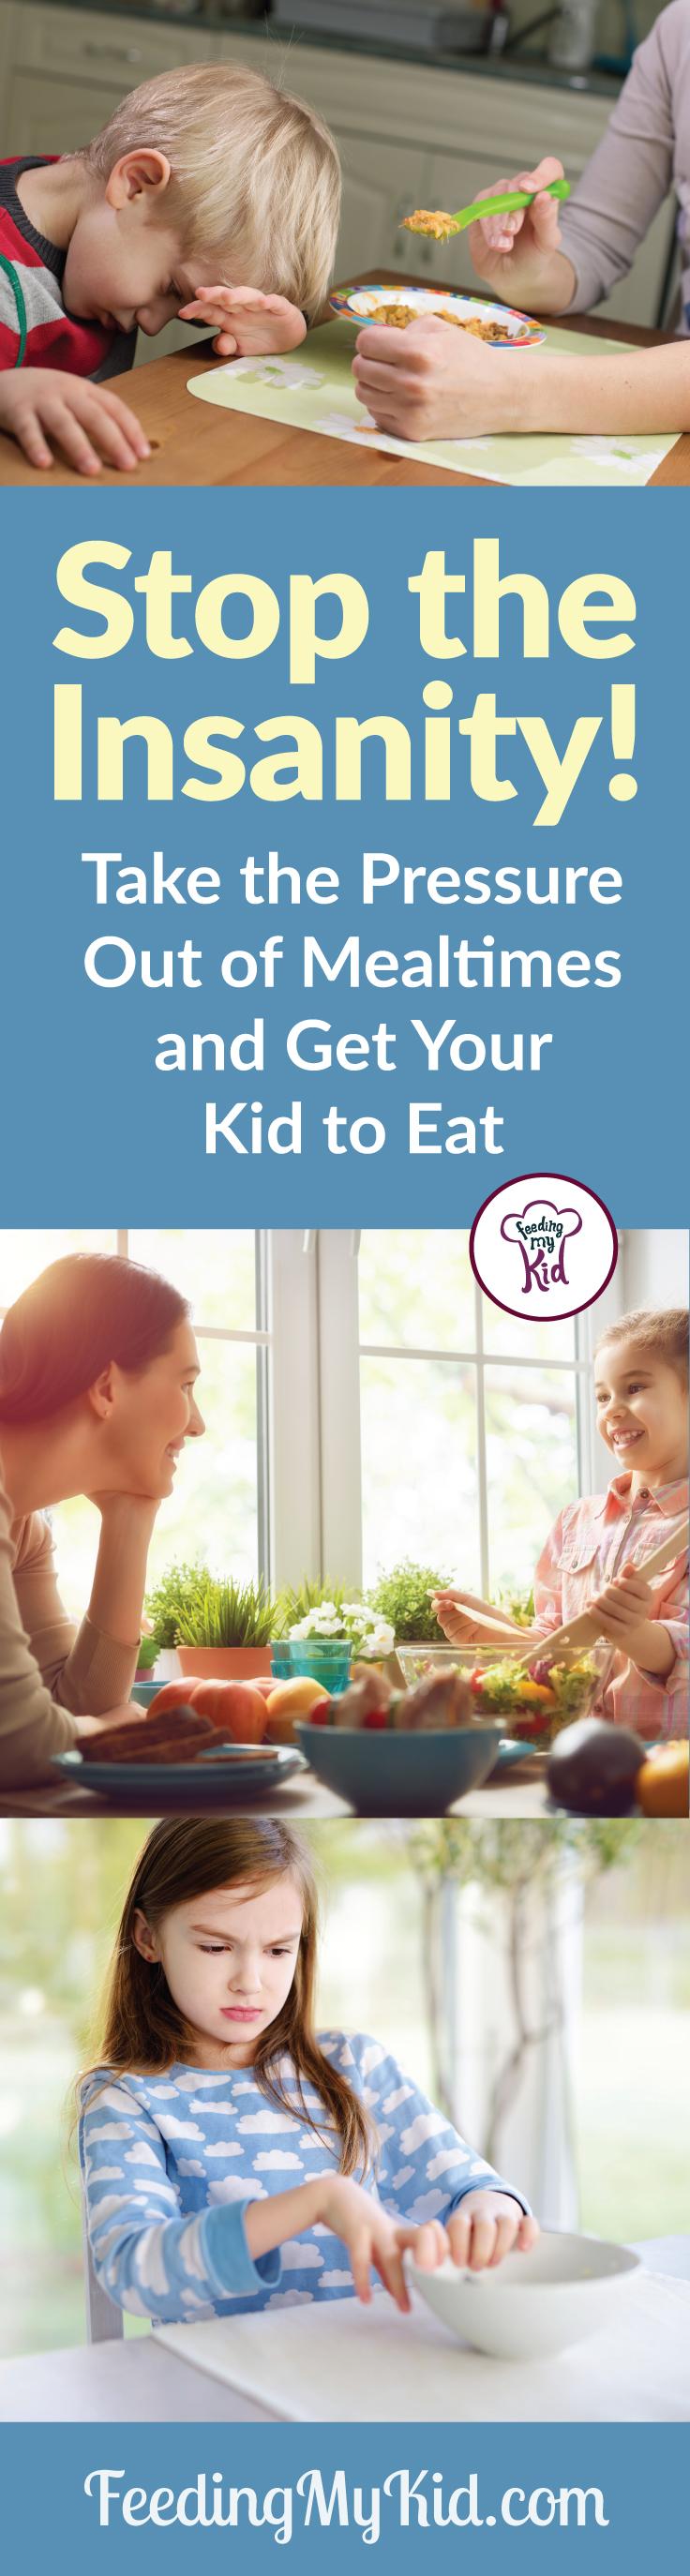 Mealtimes can be so stressful. Check out this advice on how to help take the pressure out of mealtimes to Get Your Kids to Eat. Get Picky Eating Help.